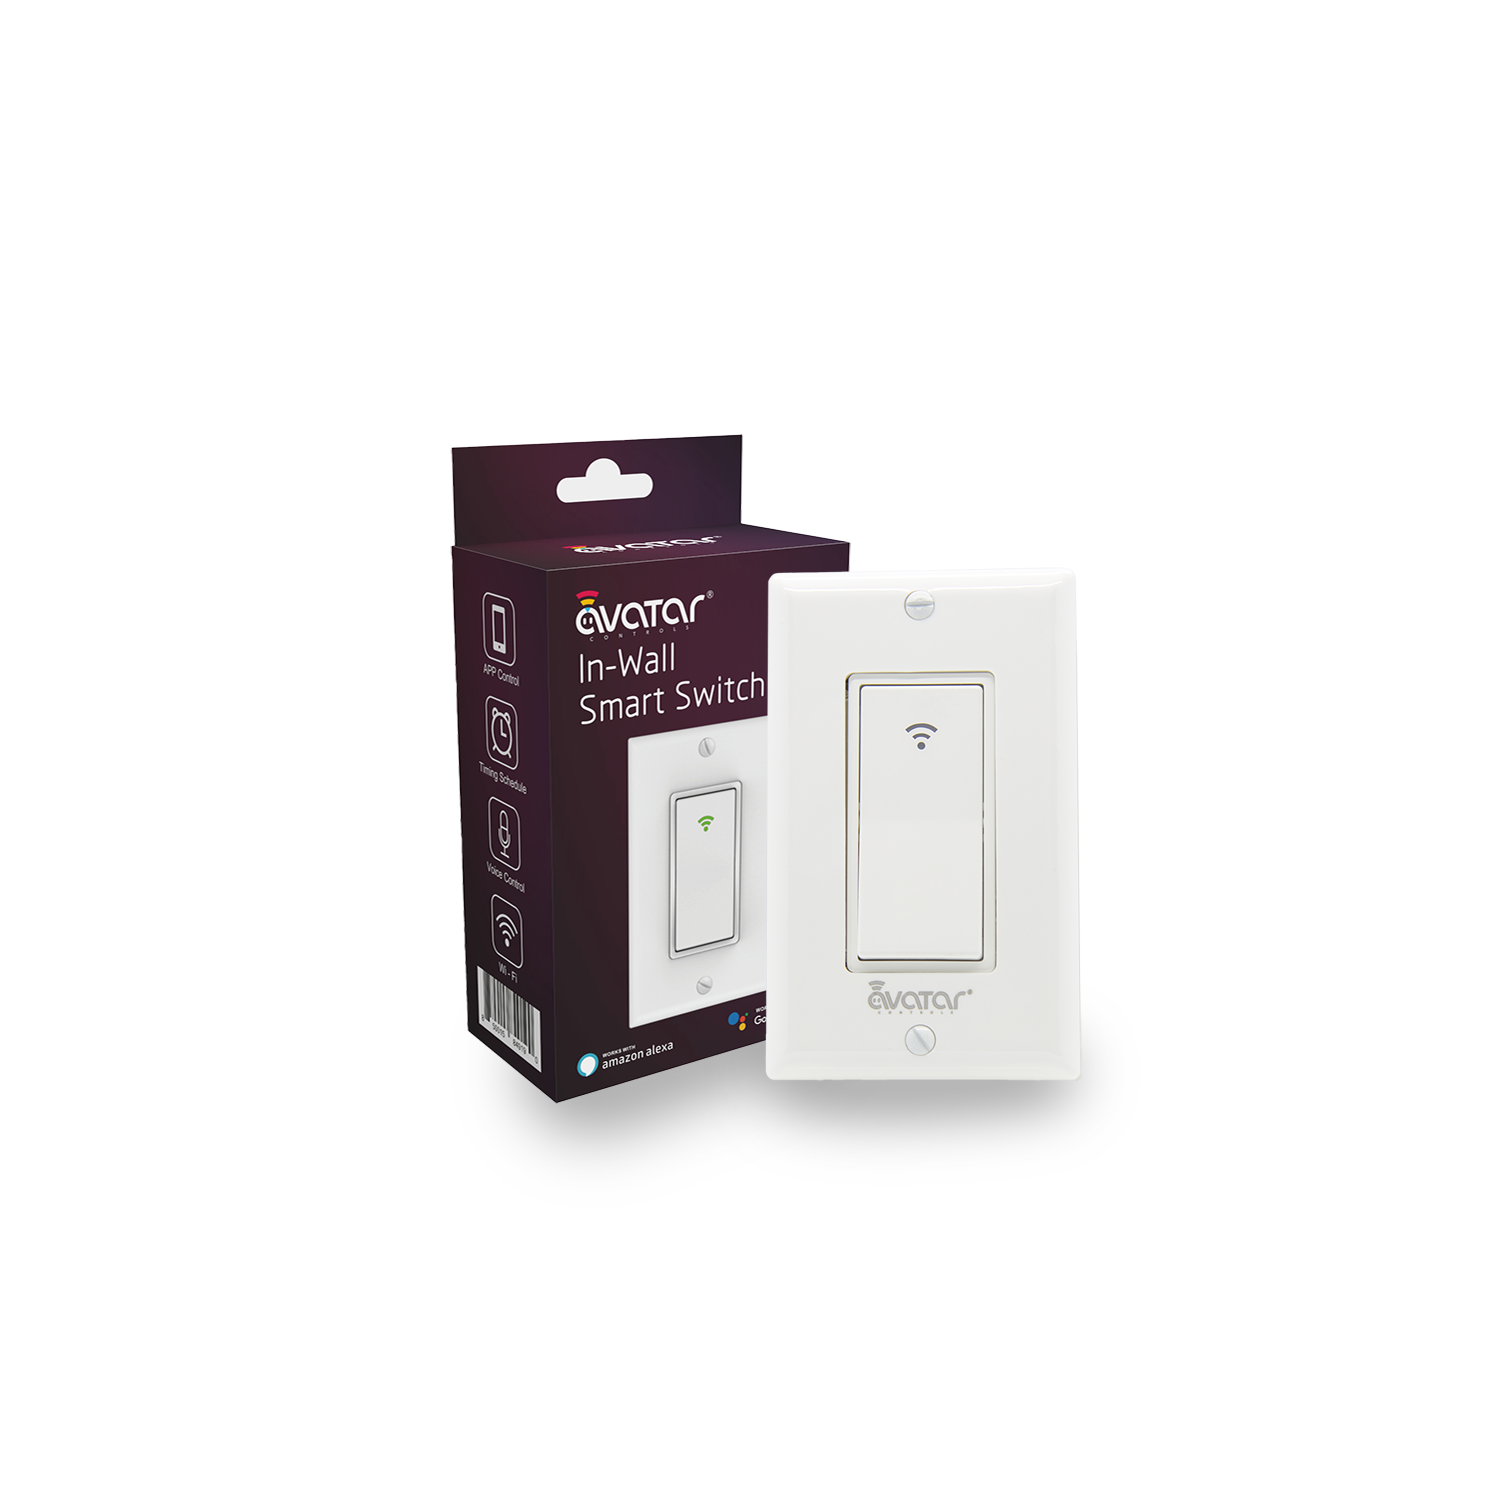 Avatar Controls In-Wall Smart Wifi Light Switch Fireproof Remote Control